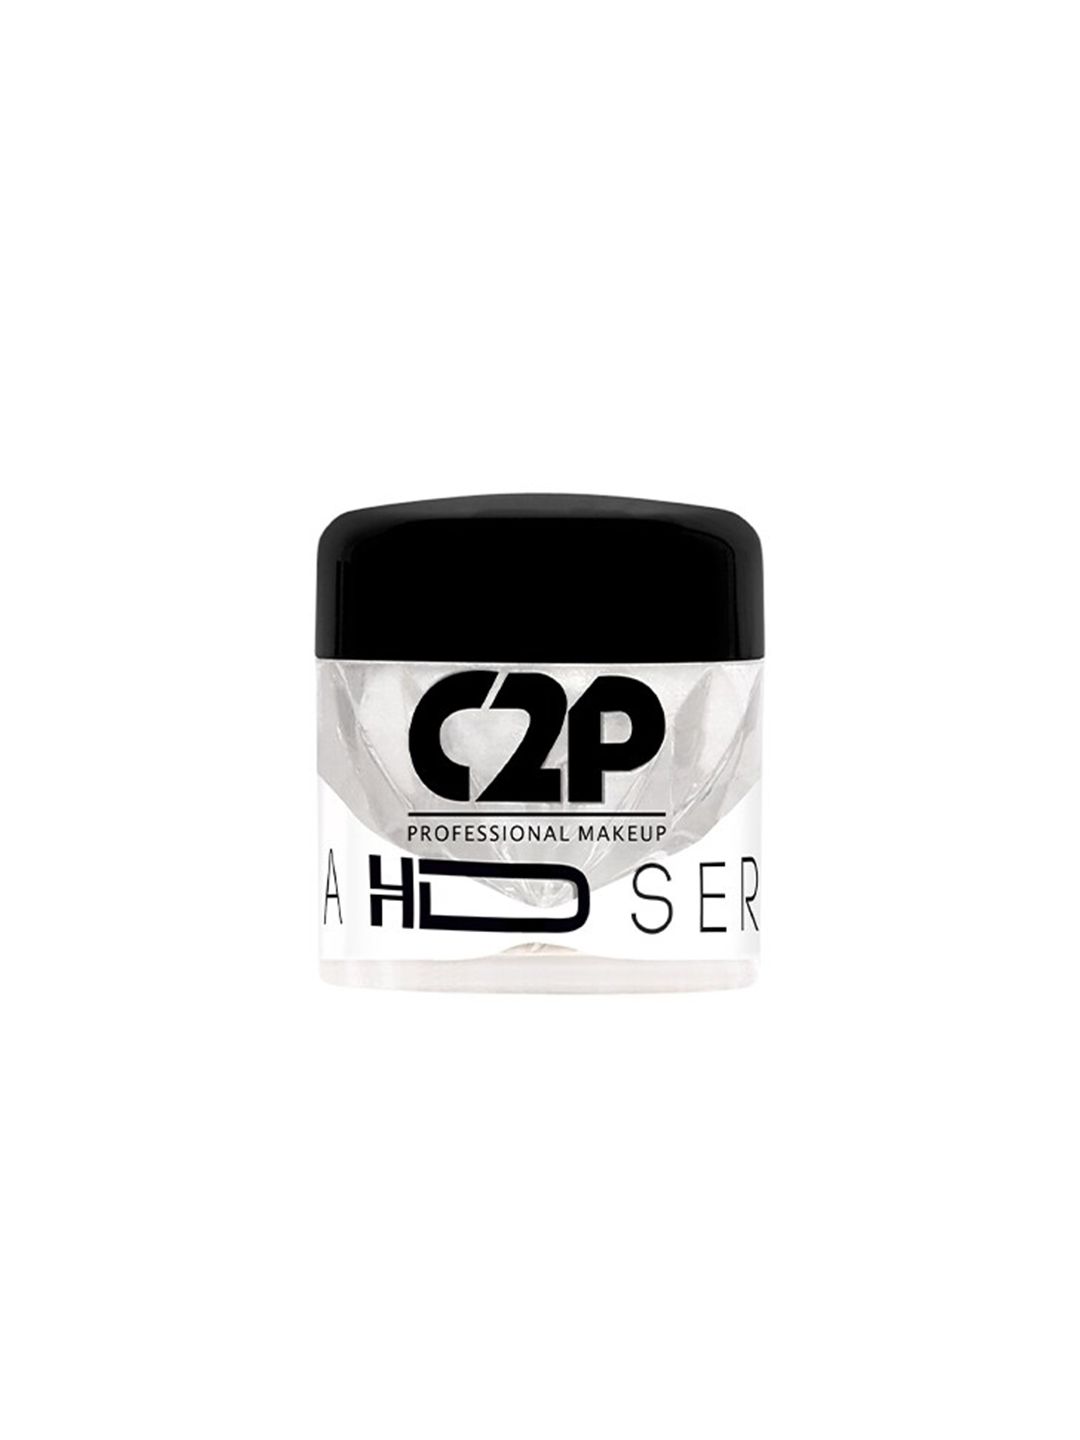 C2P PROFESSIONAL MAKEUP HD Loose Precious Pigments Eyeshadow - Snow Flake 186 Price in India